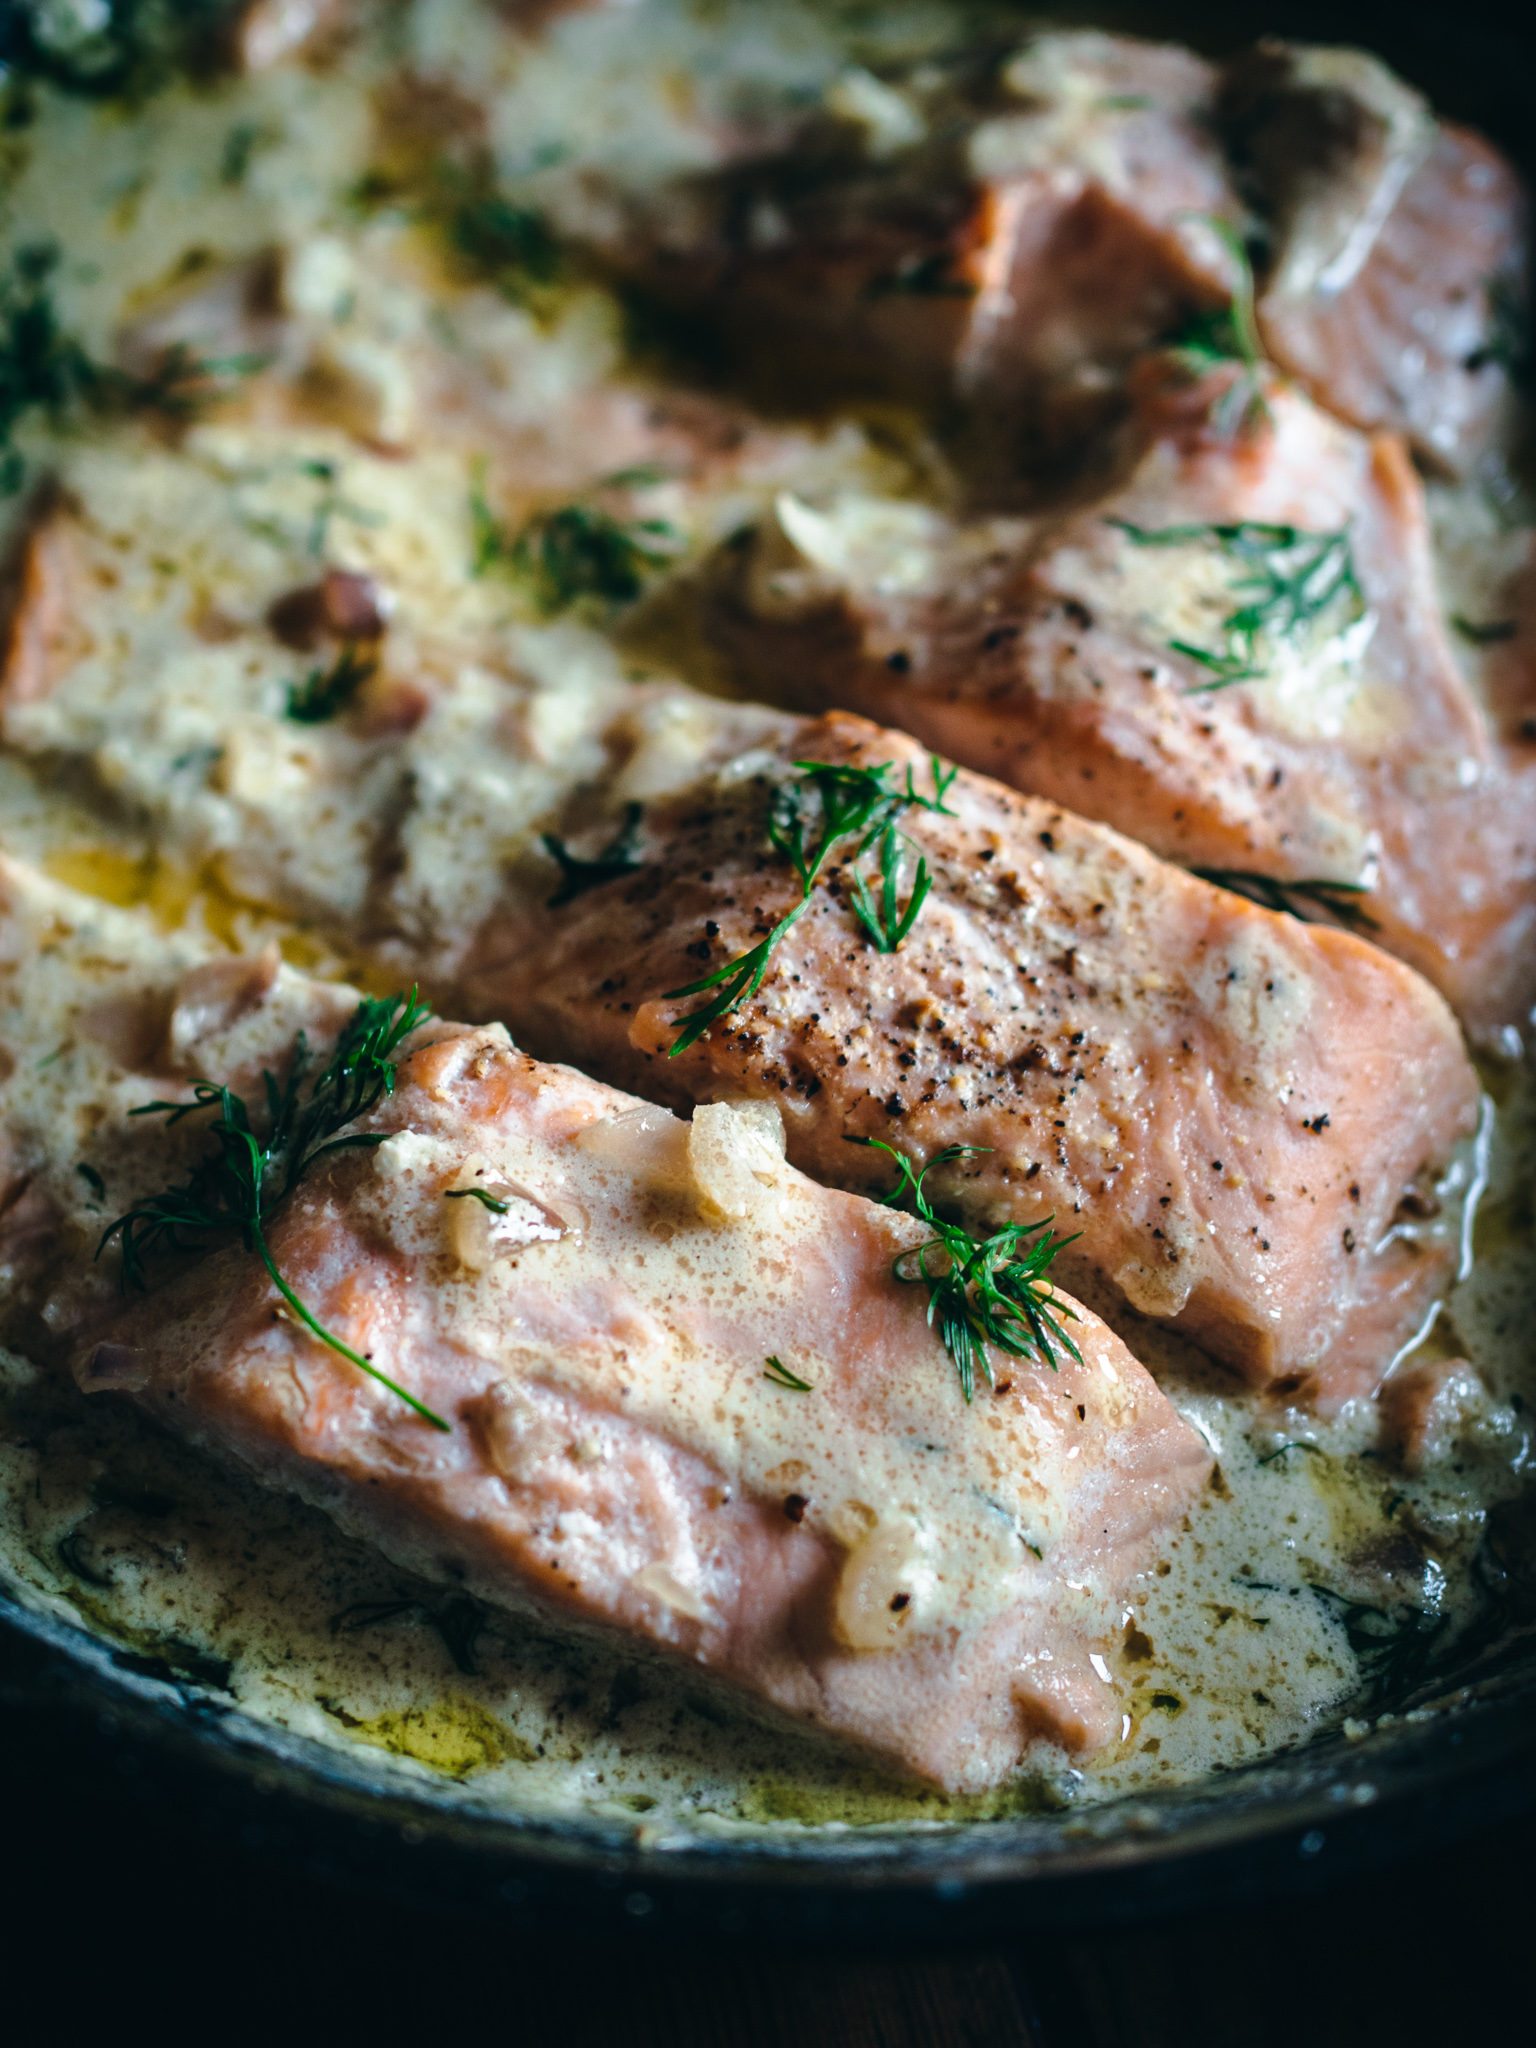 Hard Cider Poached Salmon with a Creamy Dill Sauce